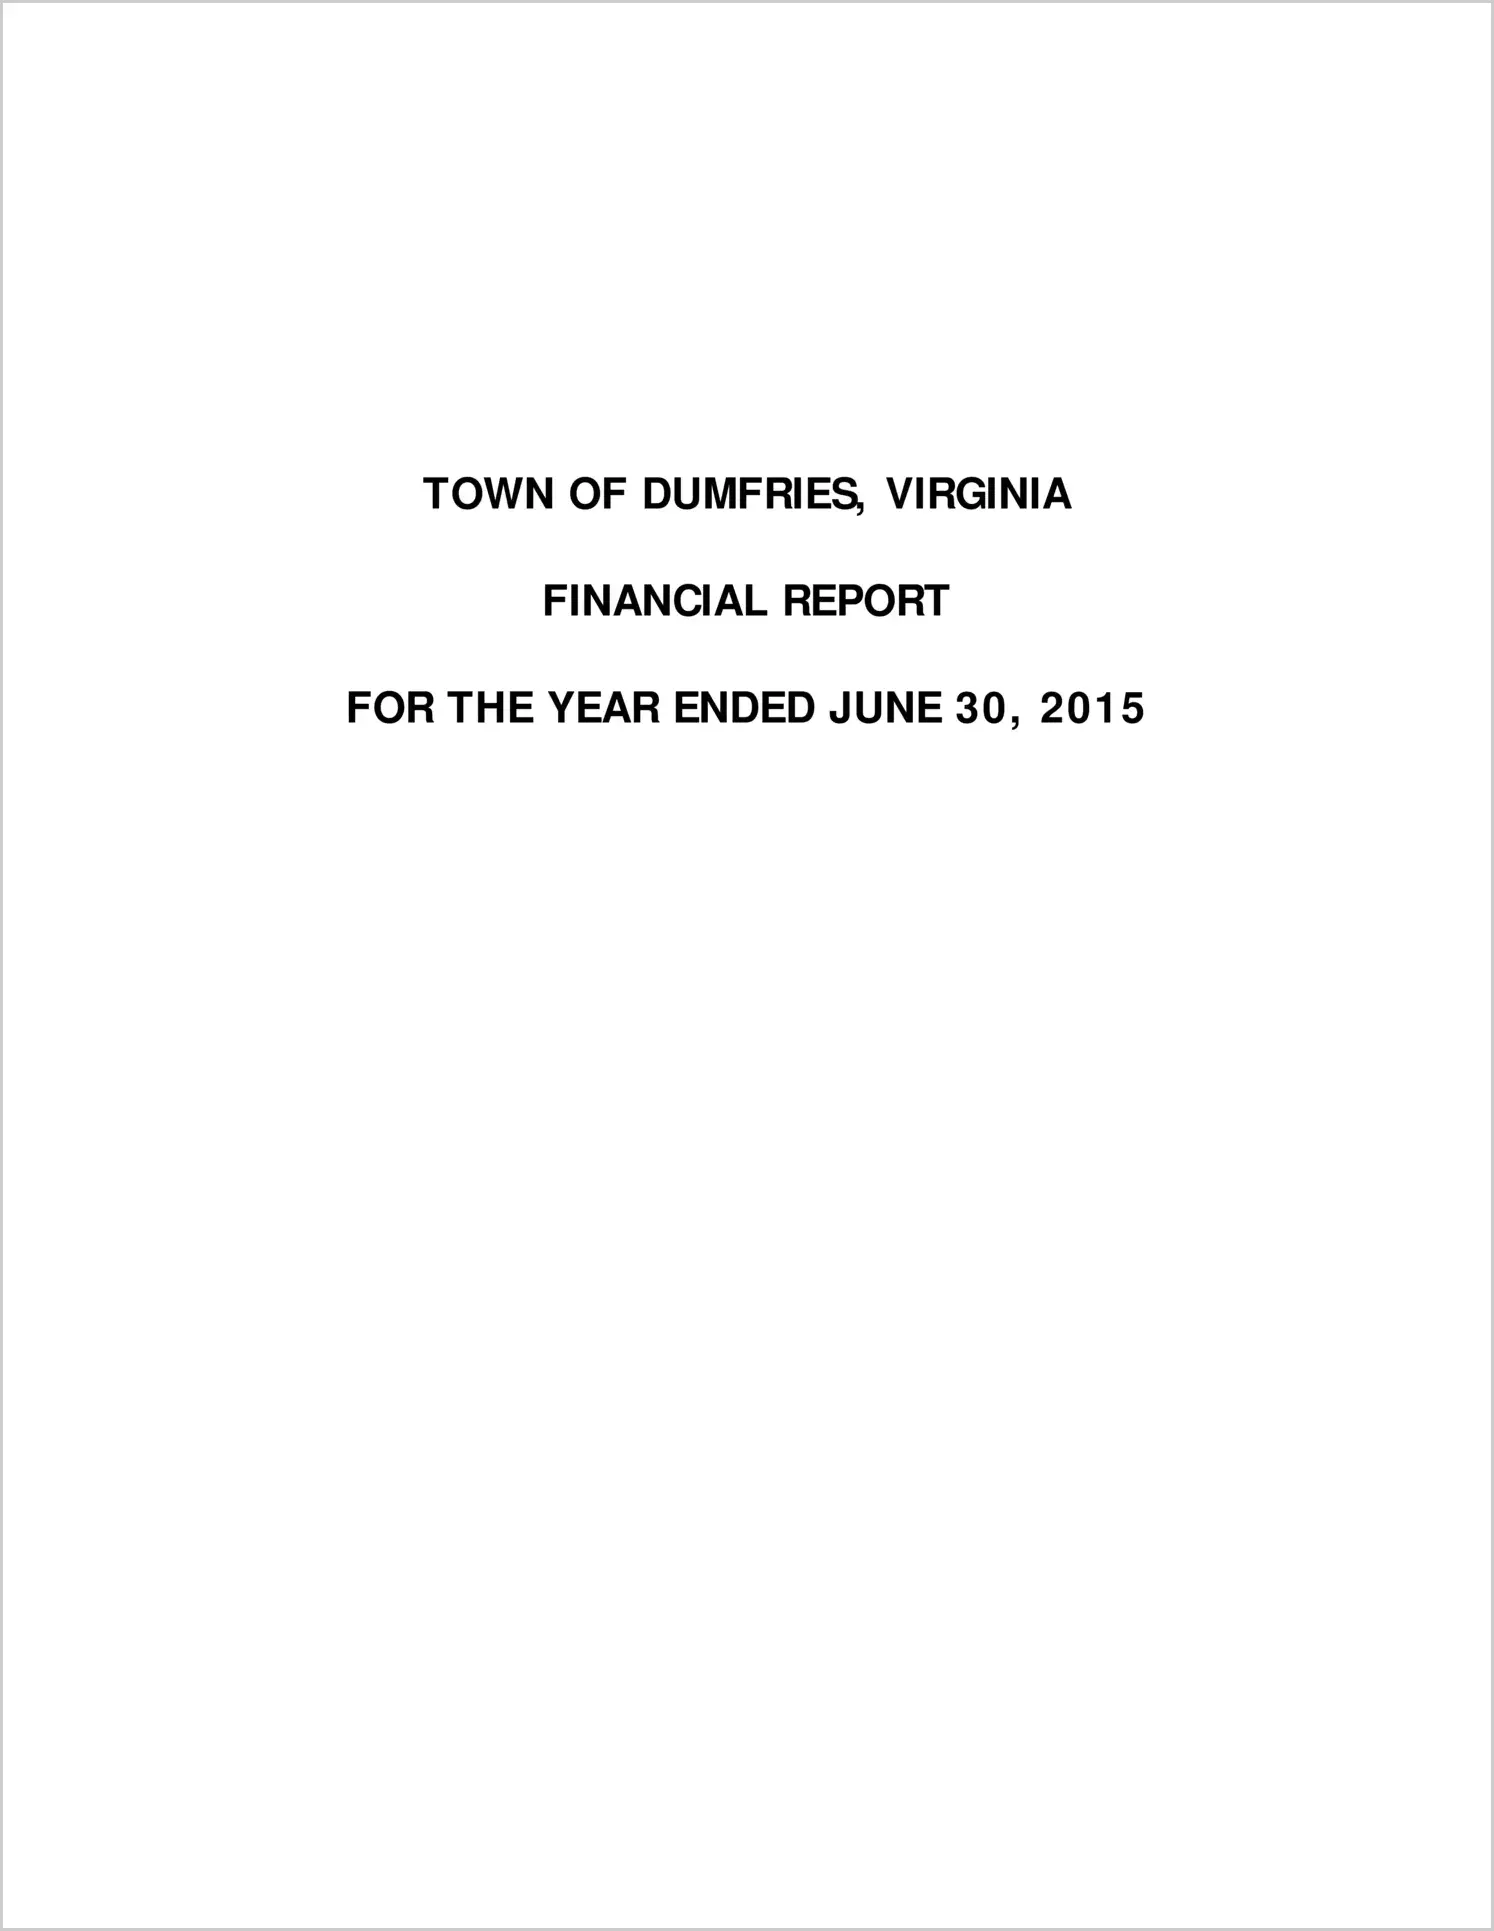 2015 Annual Financial Report for Town of Dumfries